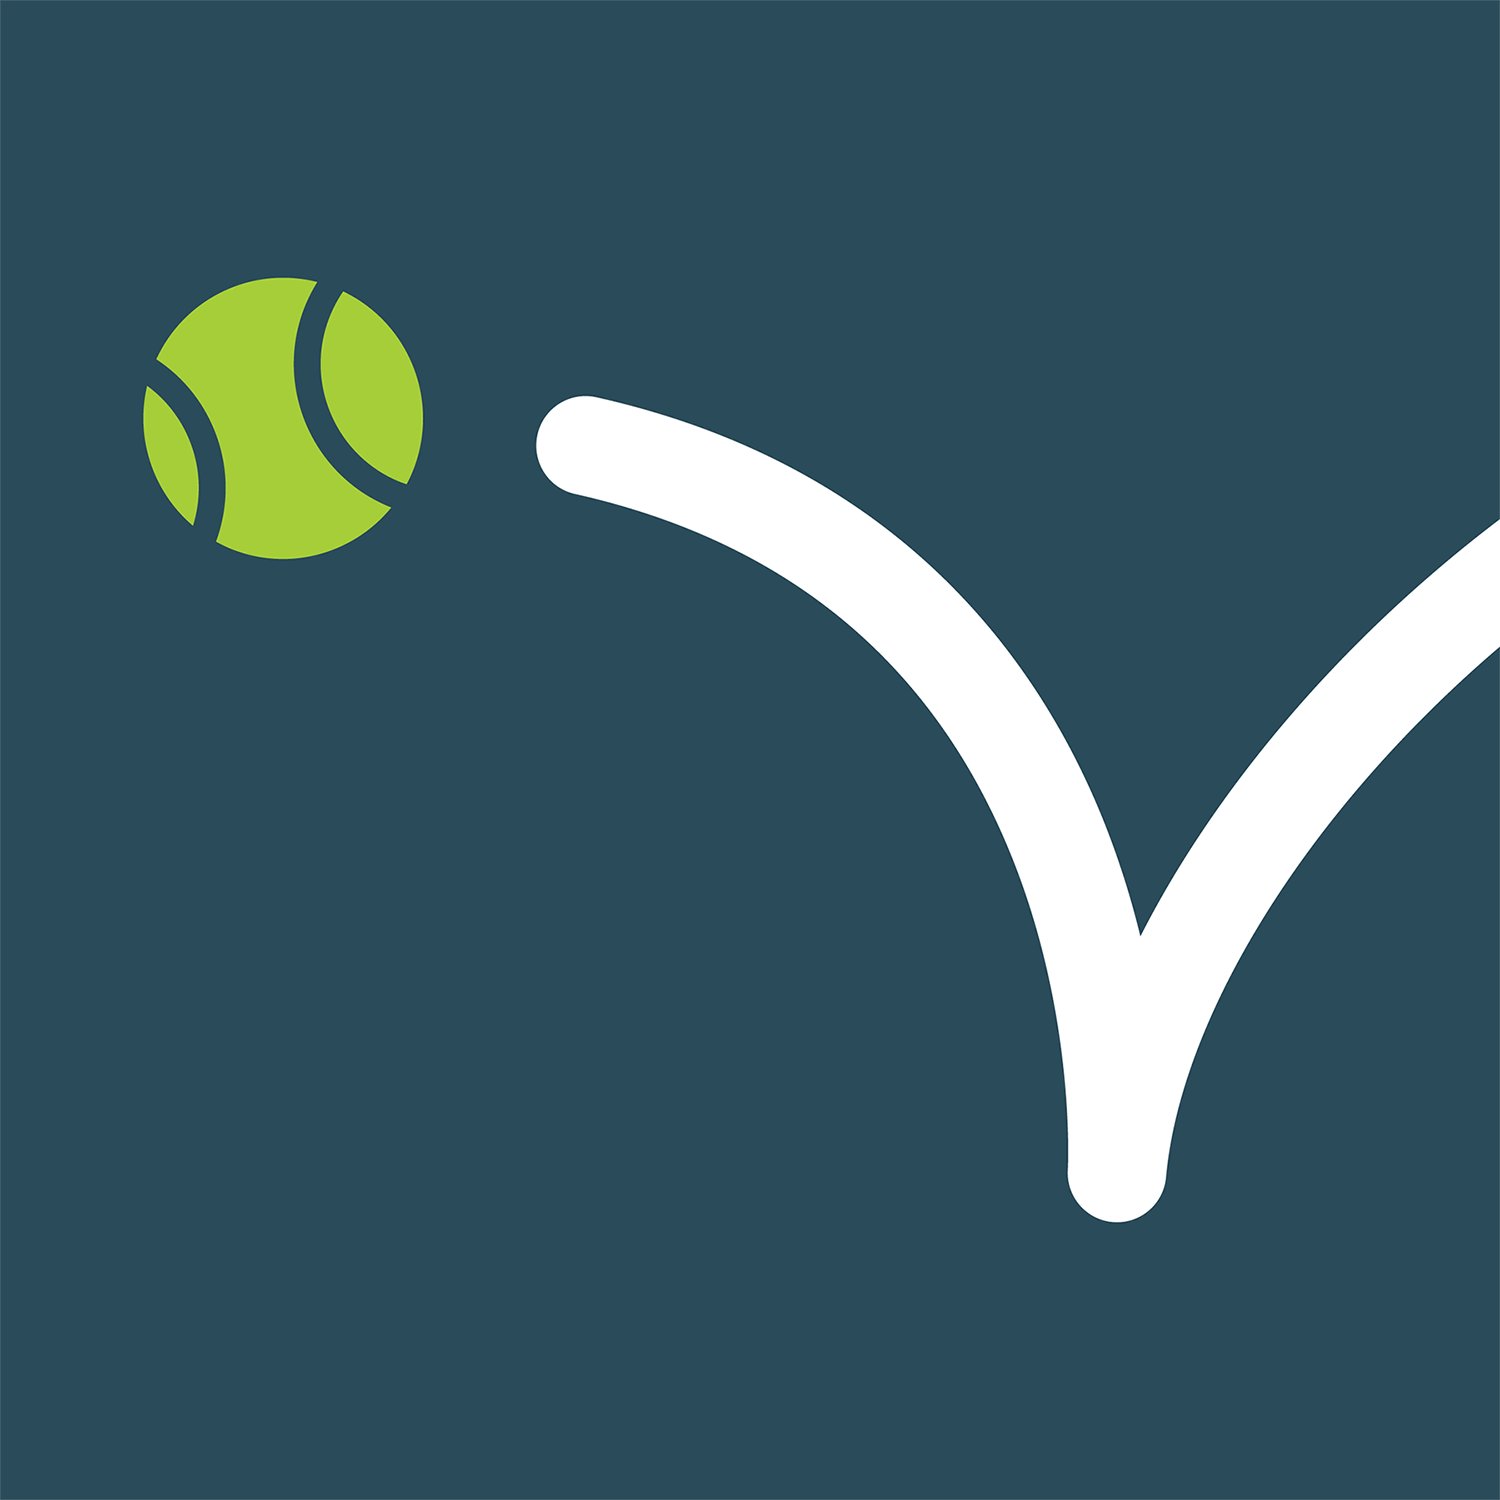 🎾Get a game of Tennis. Anytime. Anywhere. 
🎾Available on iOS or Android 
🎾Share your experience with #TennisPAL 

https://t.co/tJx3obWCJ9